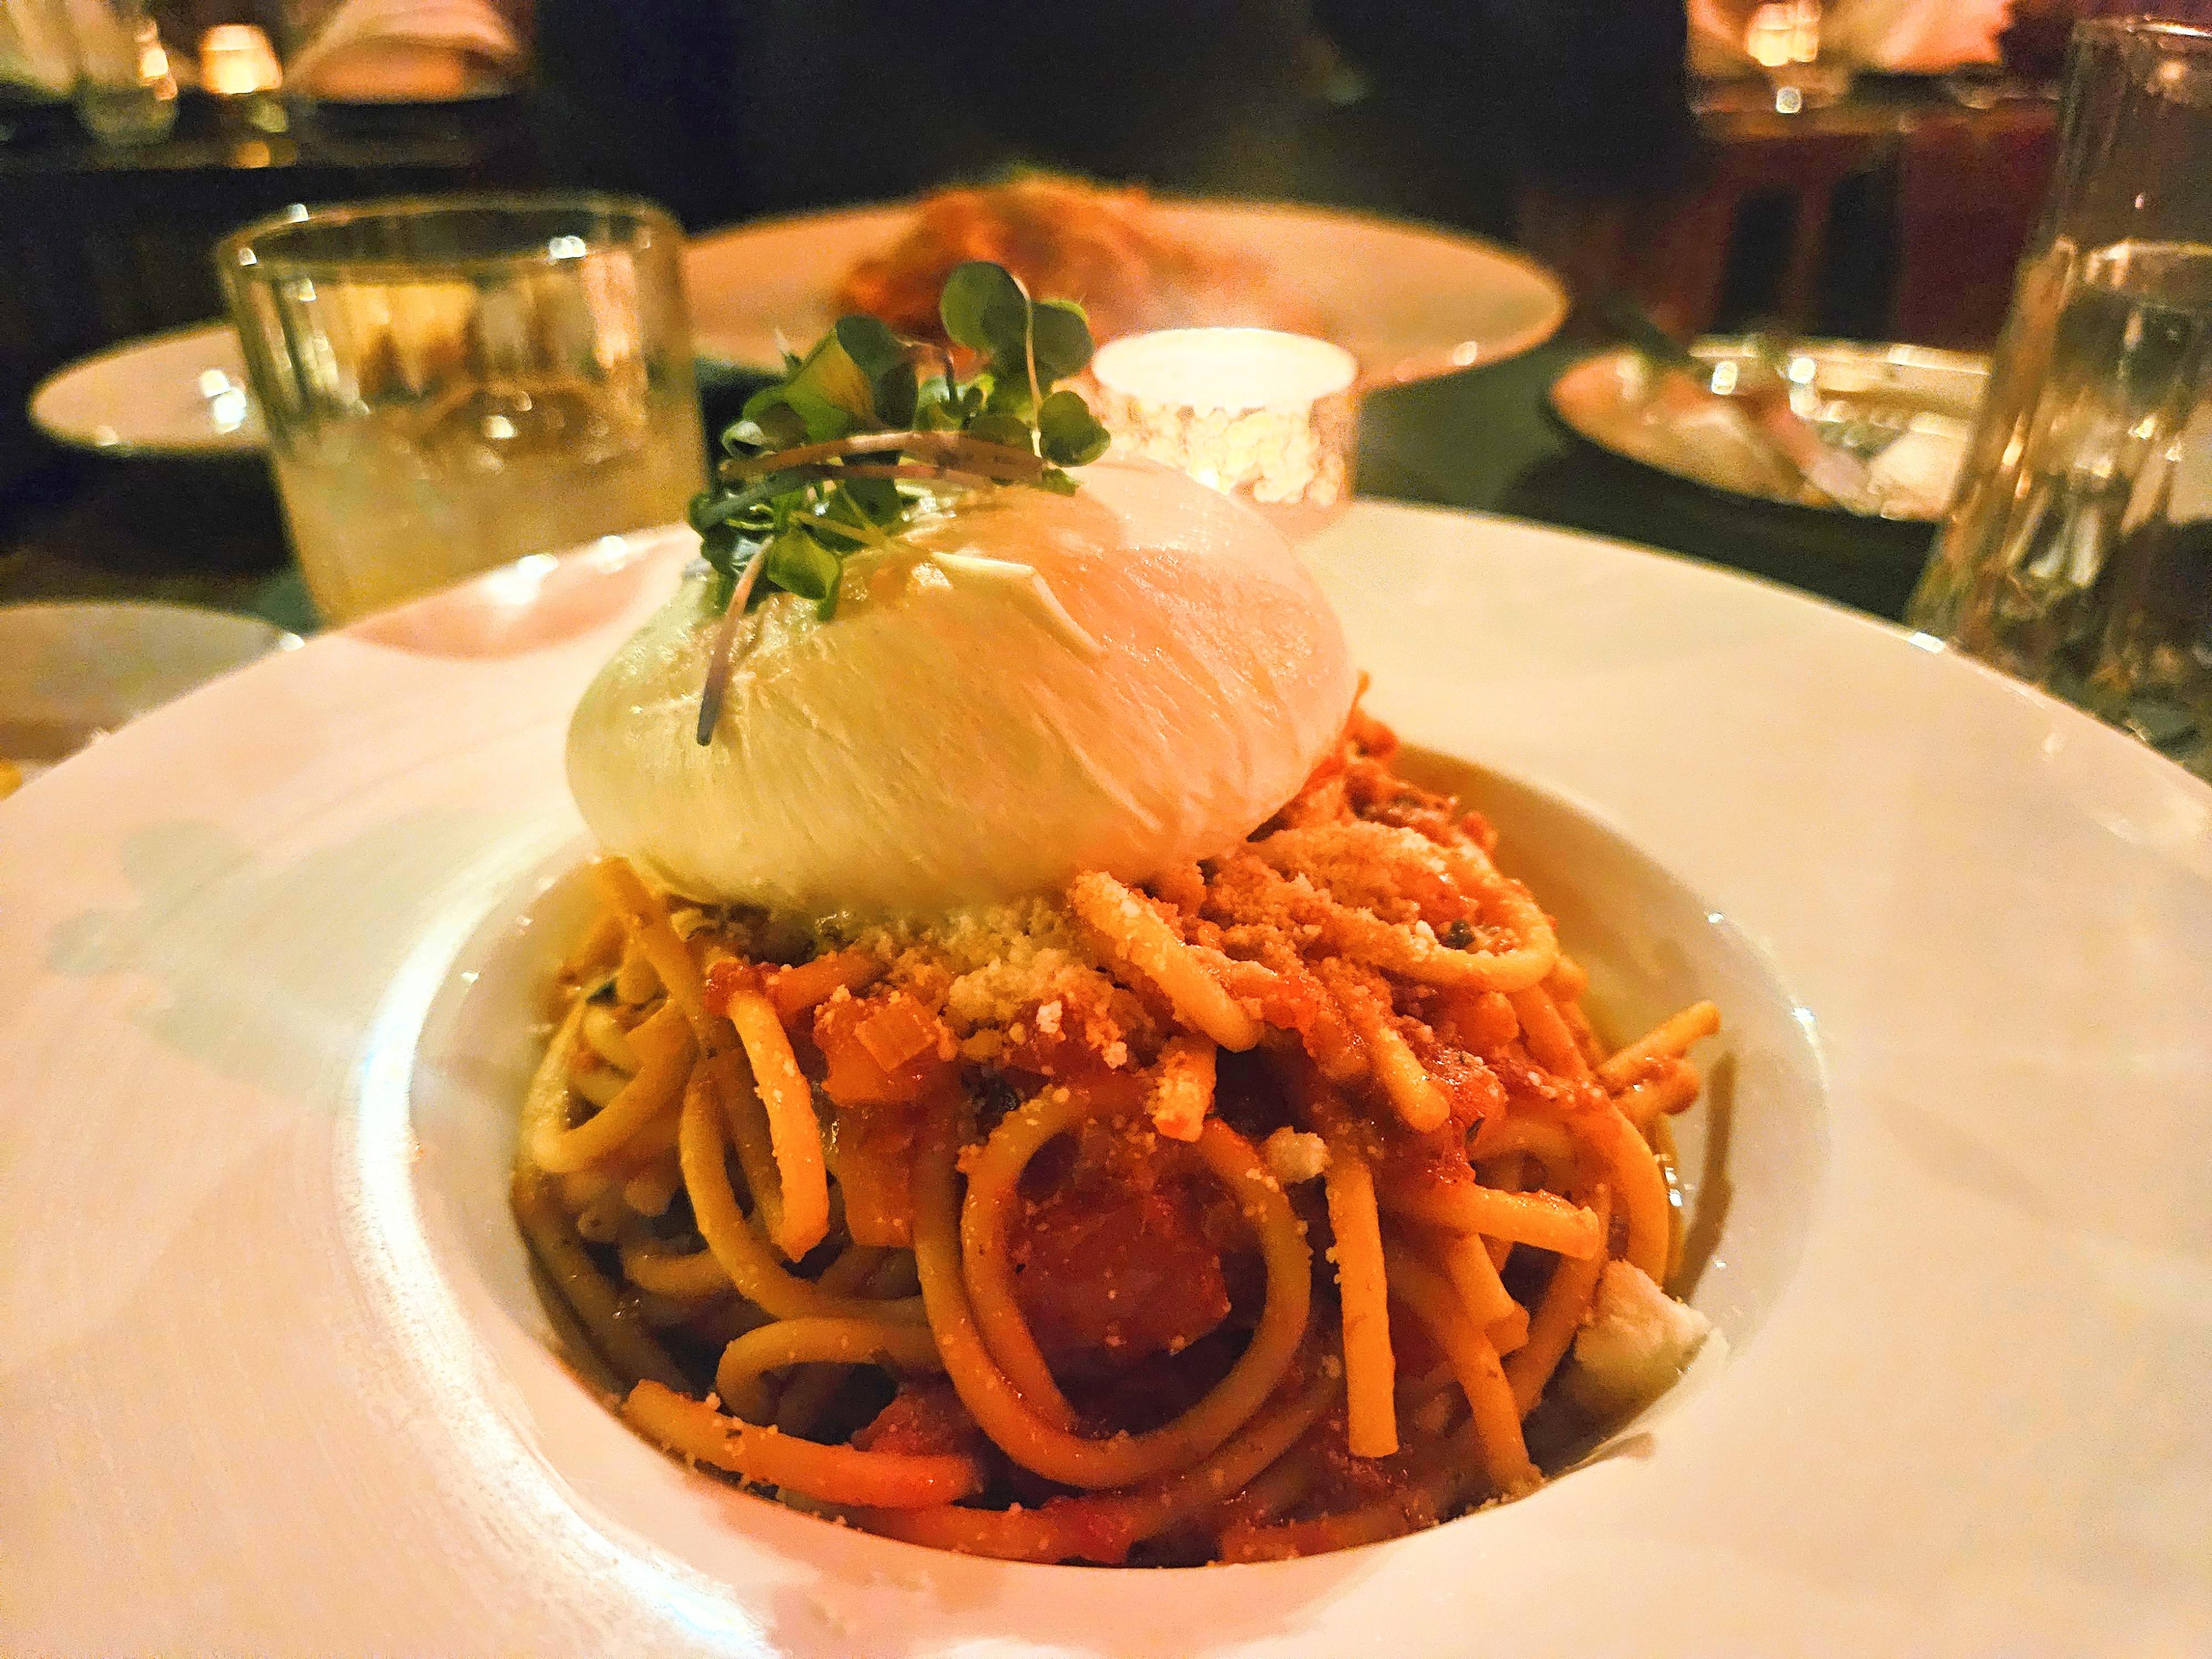 bucatini pasta with burrata cheese on top on a table.